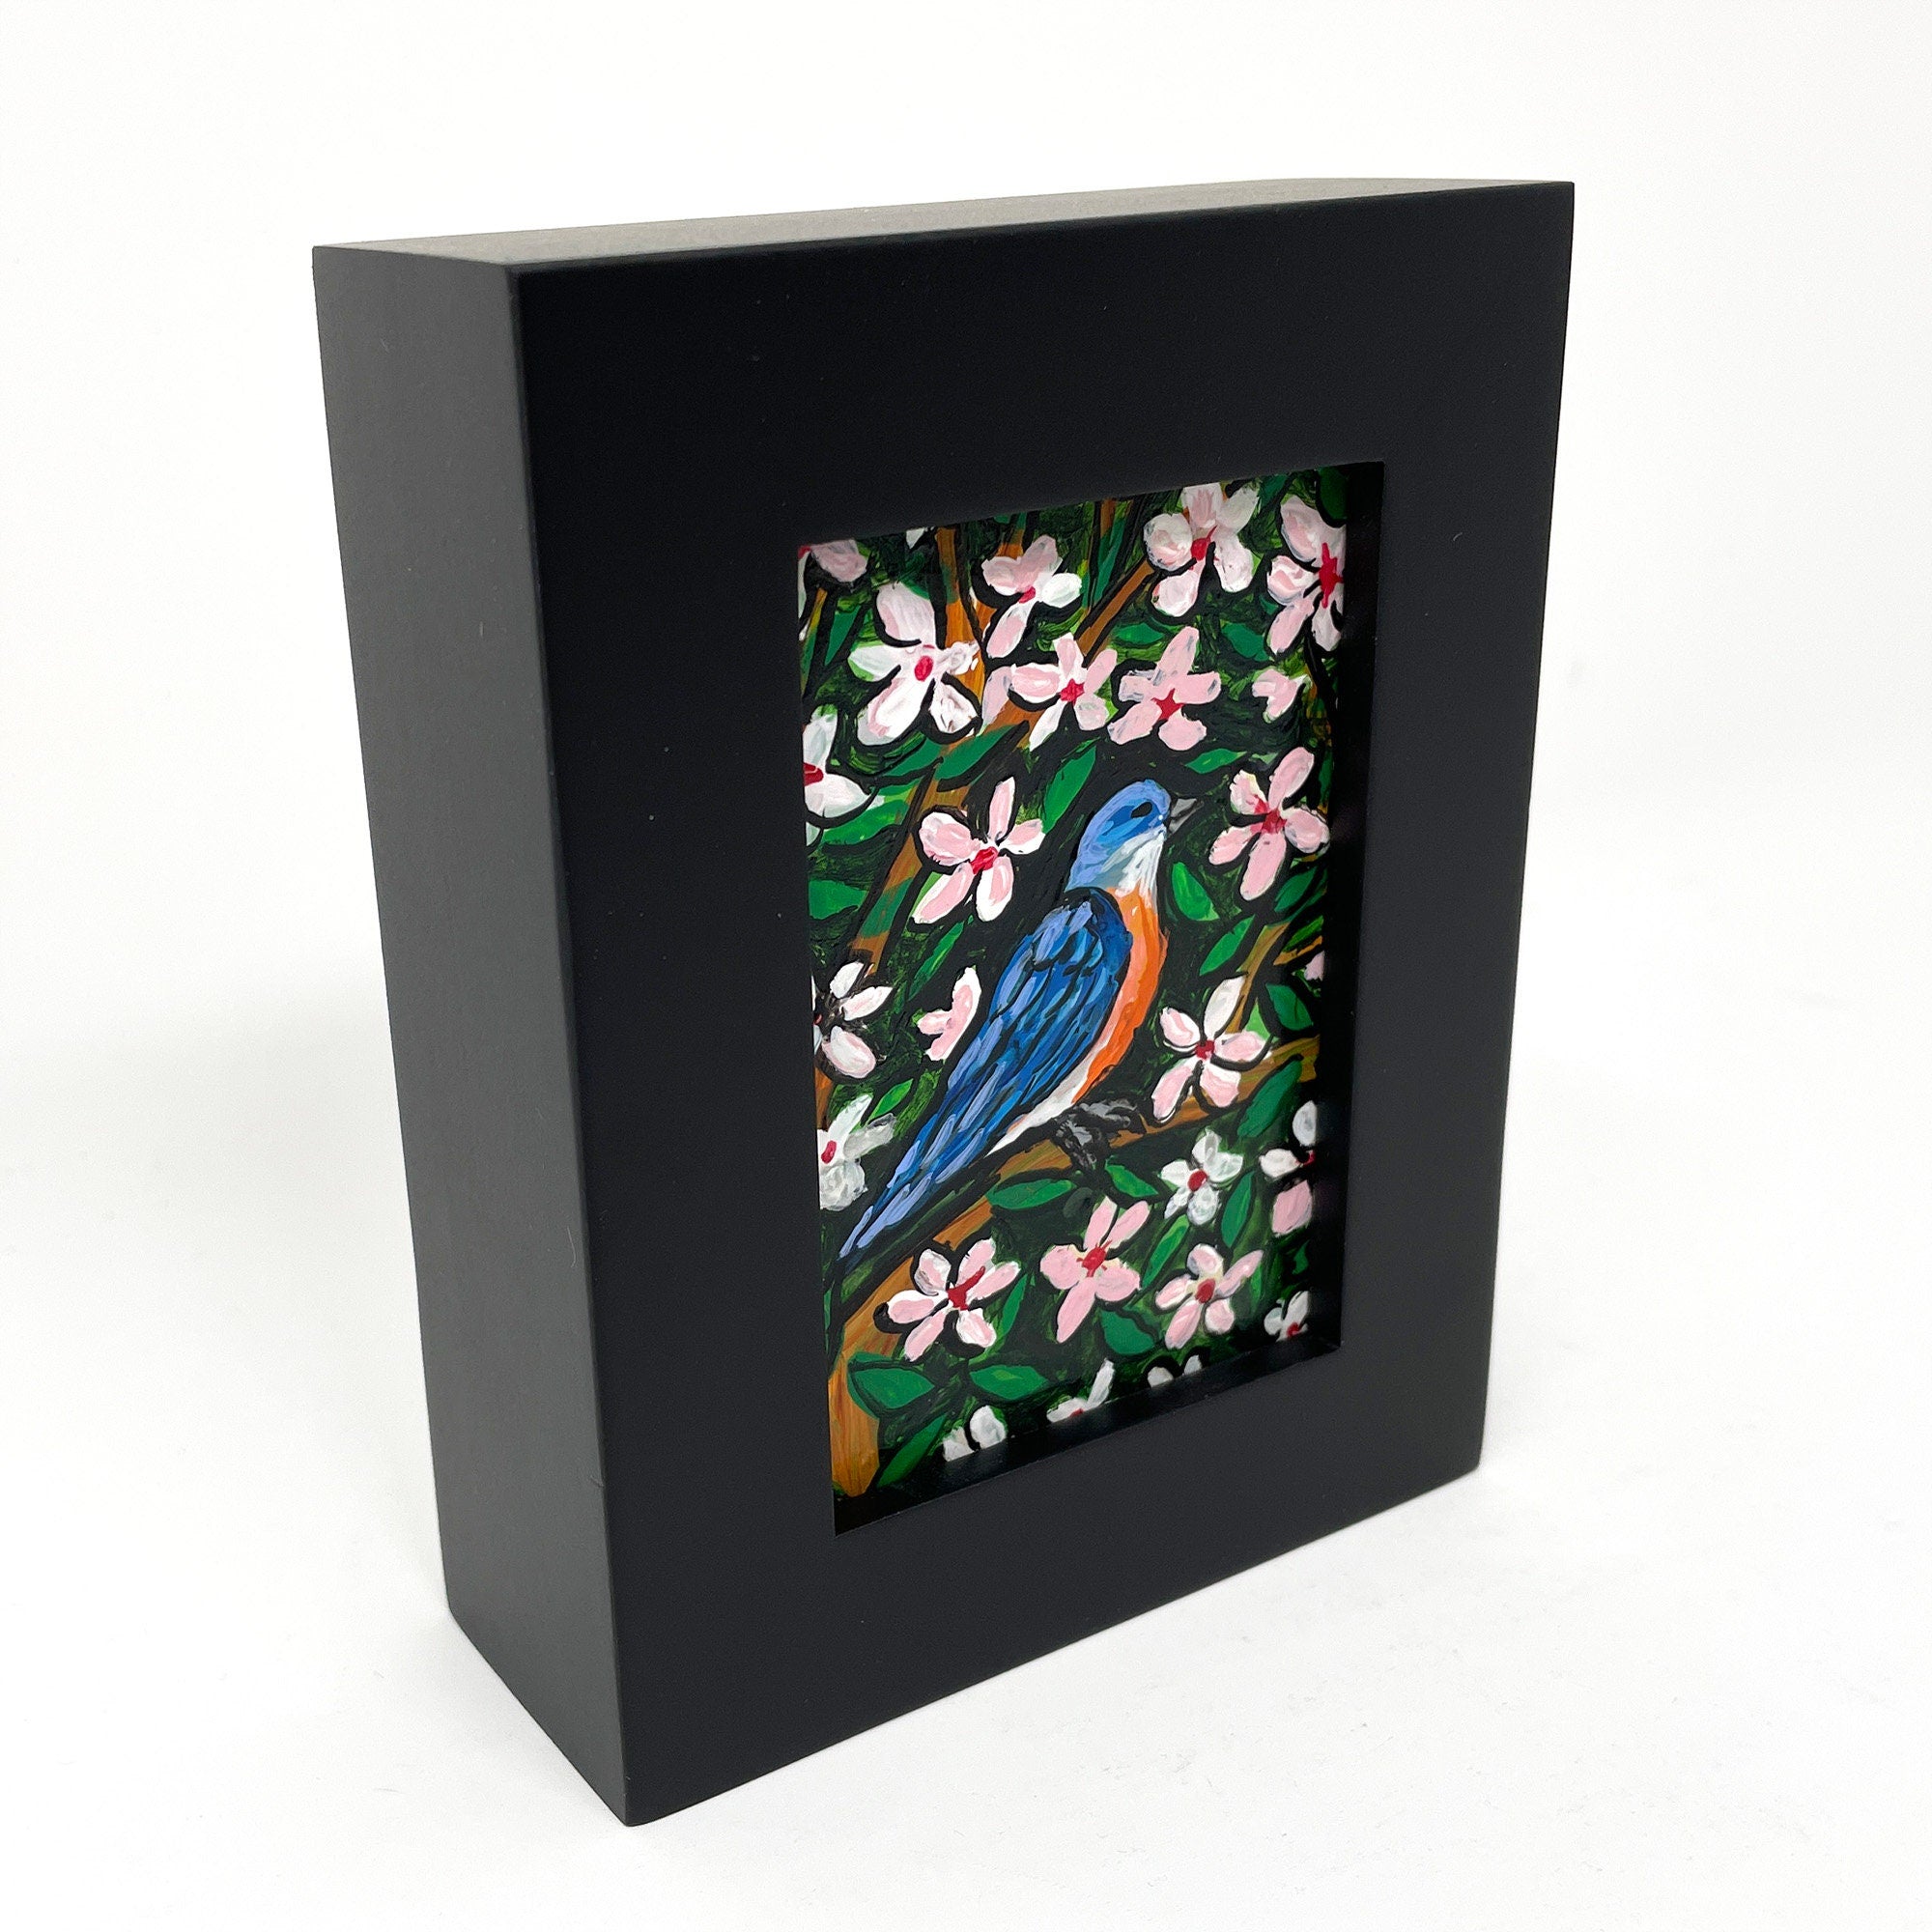 Side view of bluebird painting in black frame. In the painting a bluebird sits on a cherry tree surrounded by pink and white cherry blossoms and green leaves.